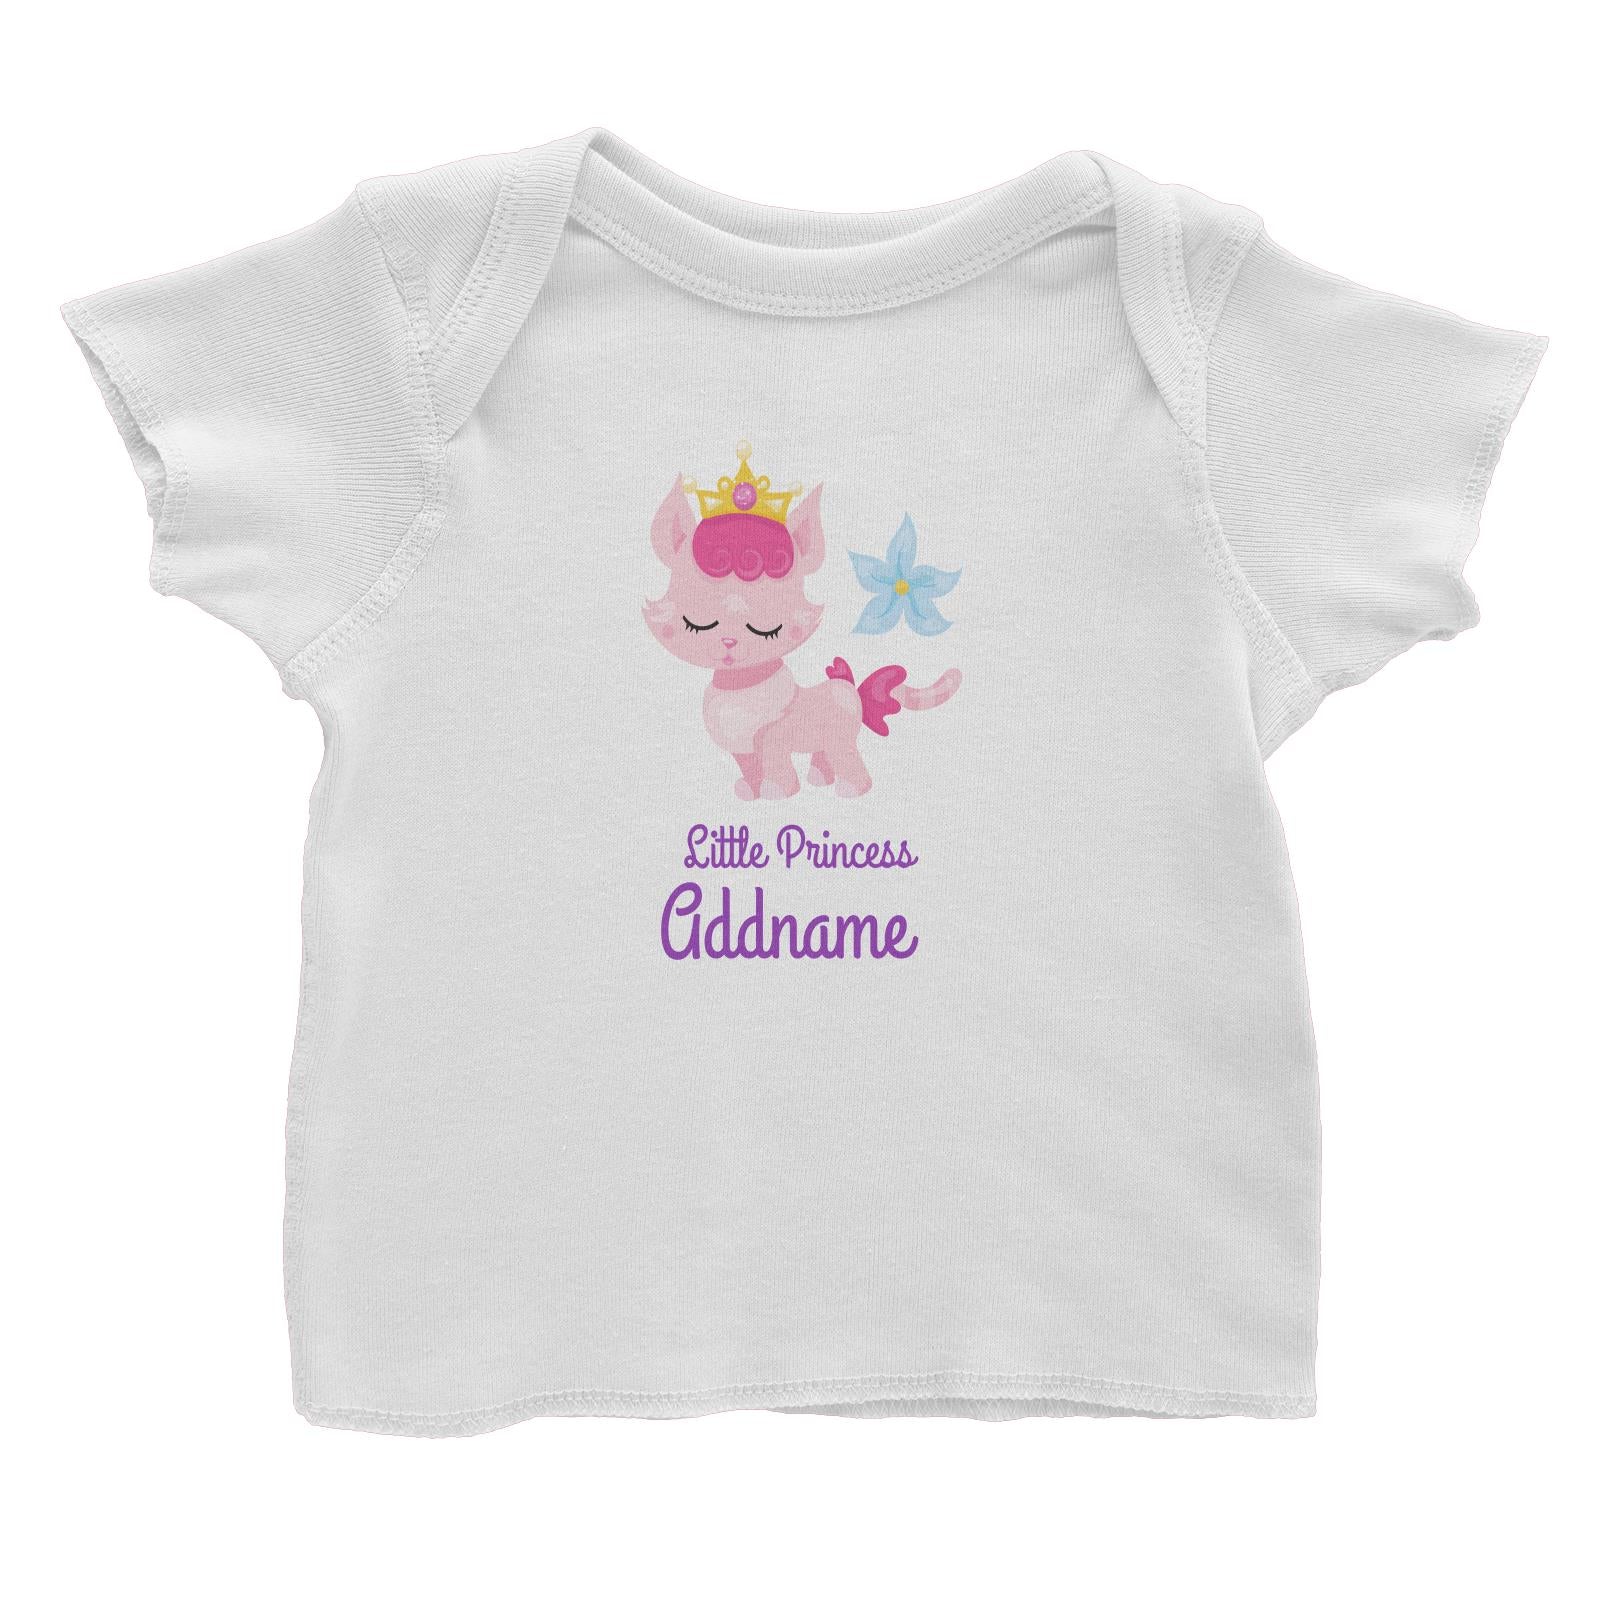 Little Princess Pets Pink Cat with Crown Addname Baby T-Shirt